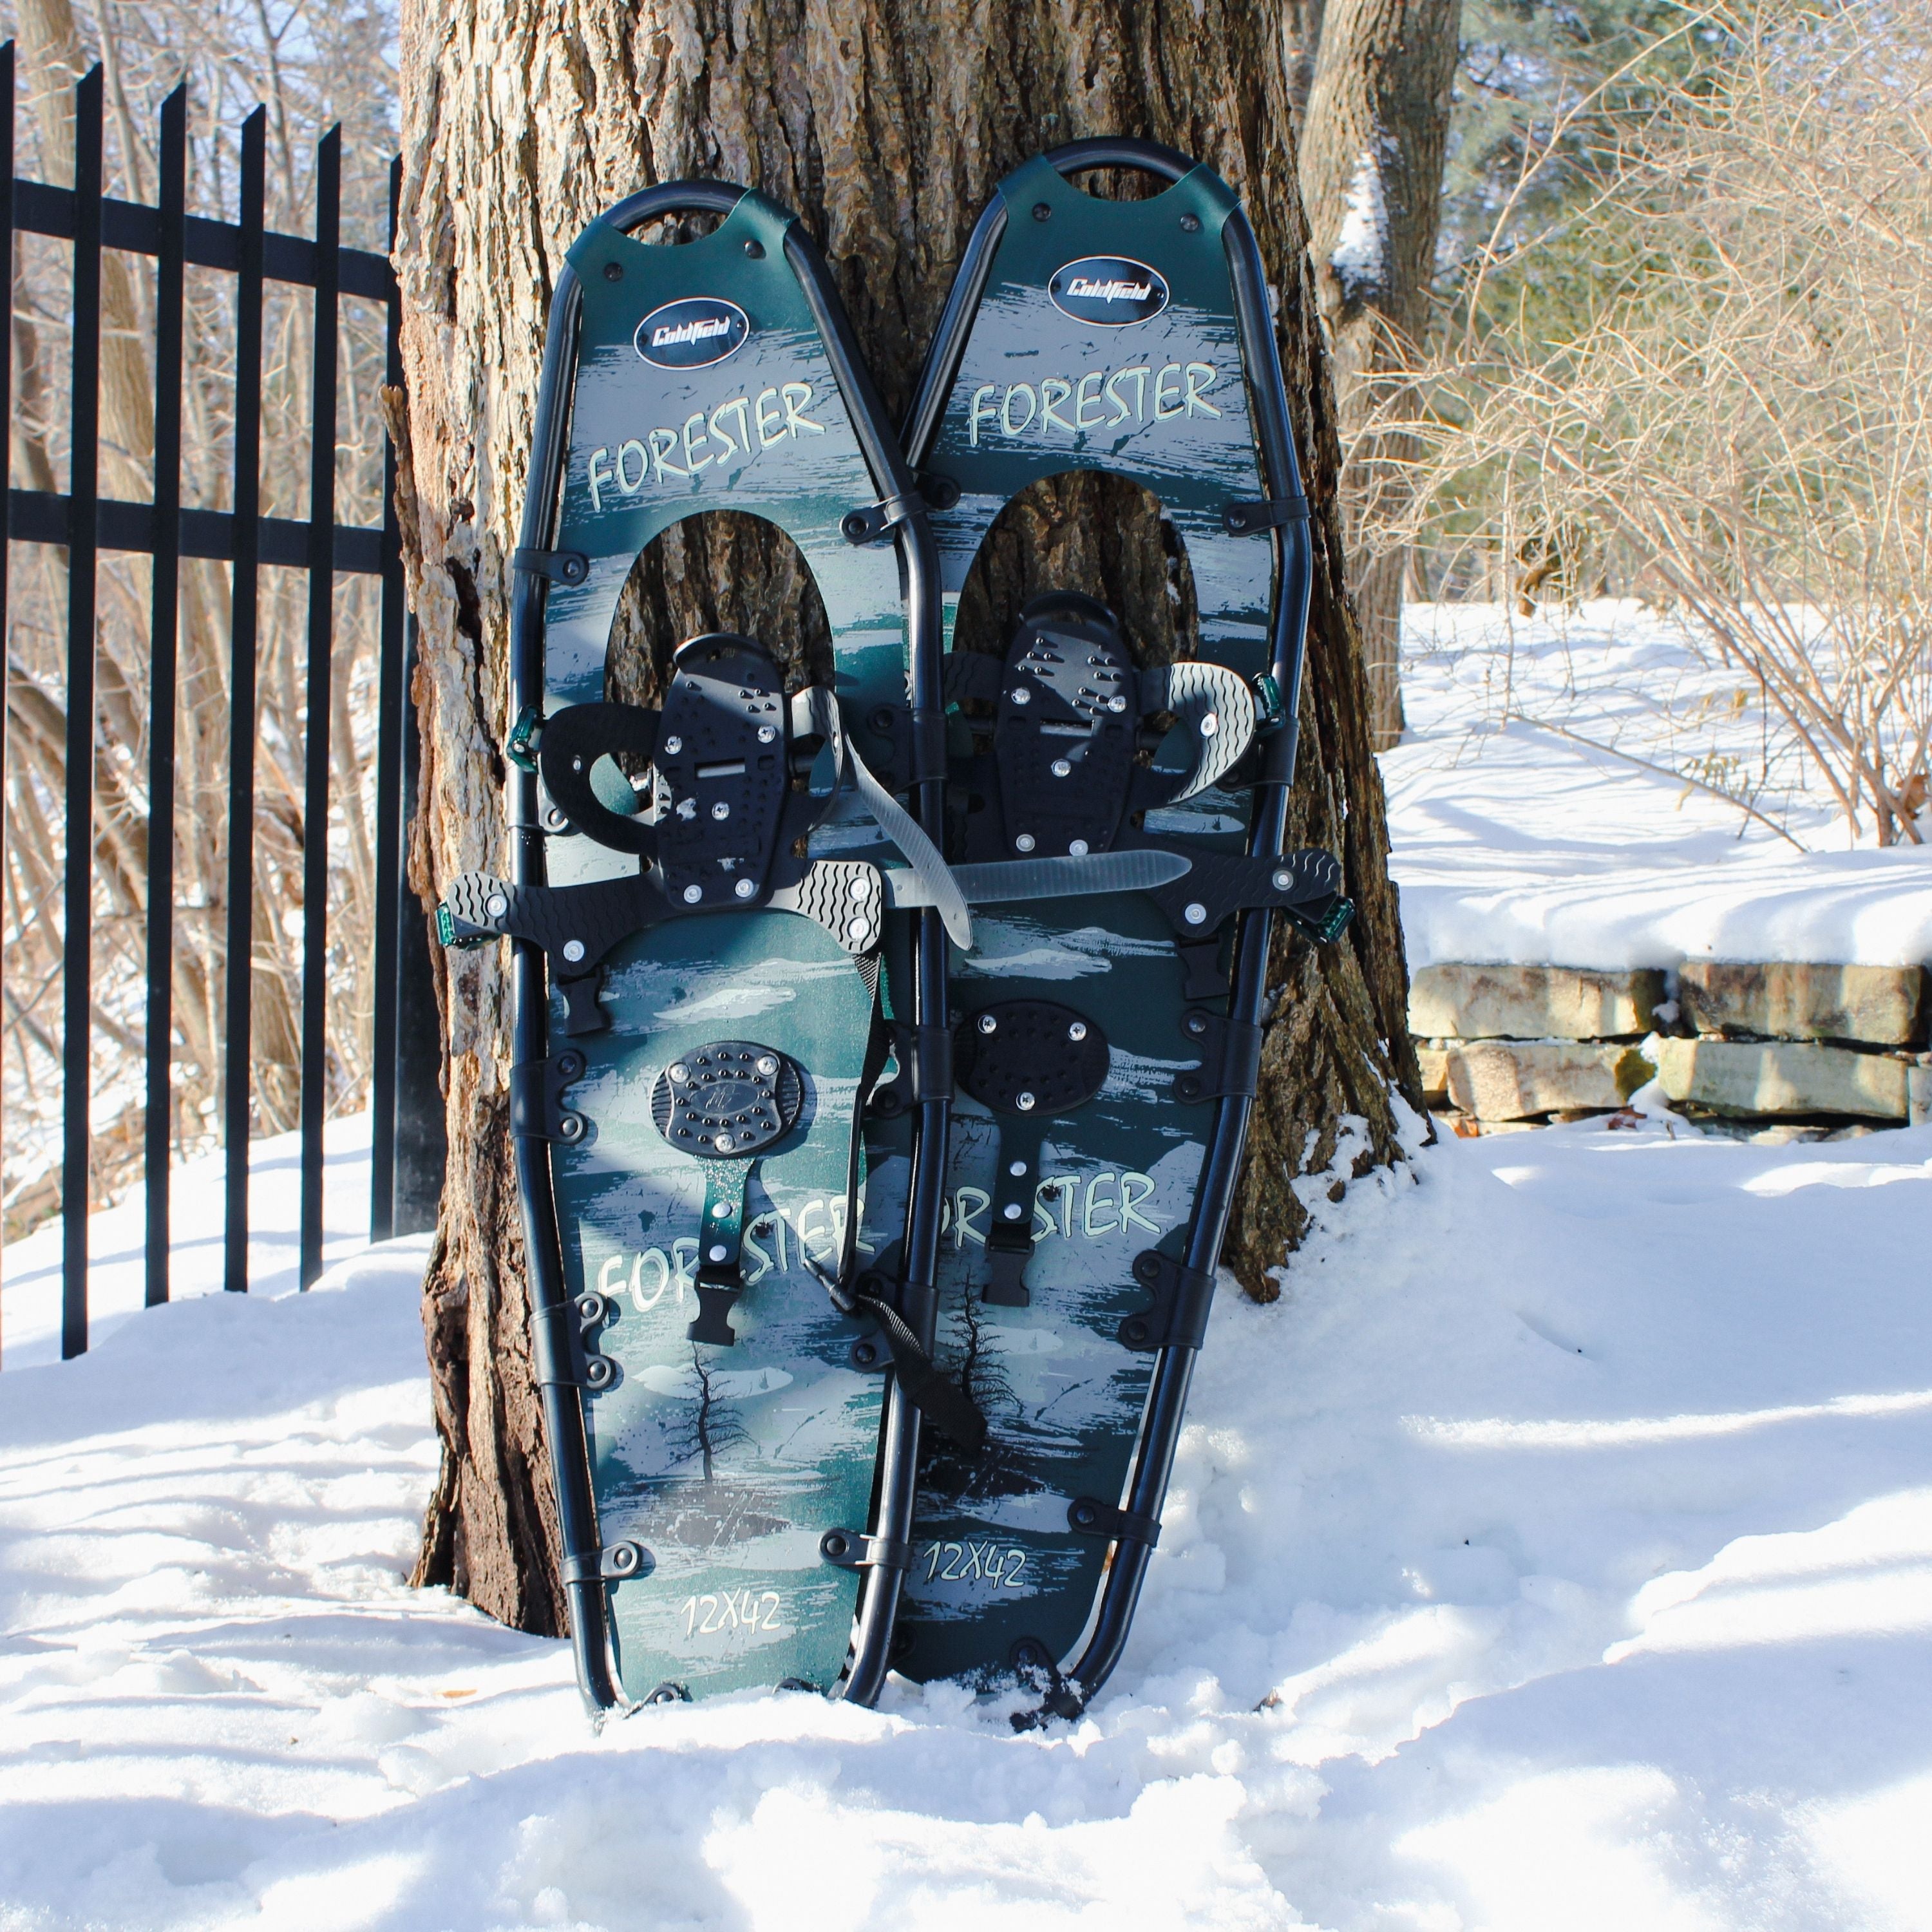 "Forester" Snowshoes